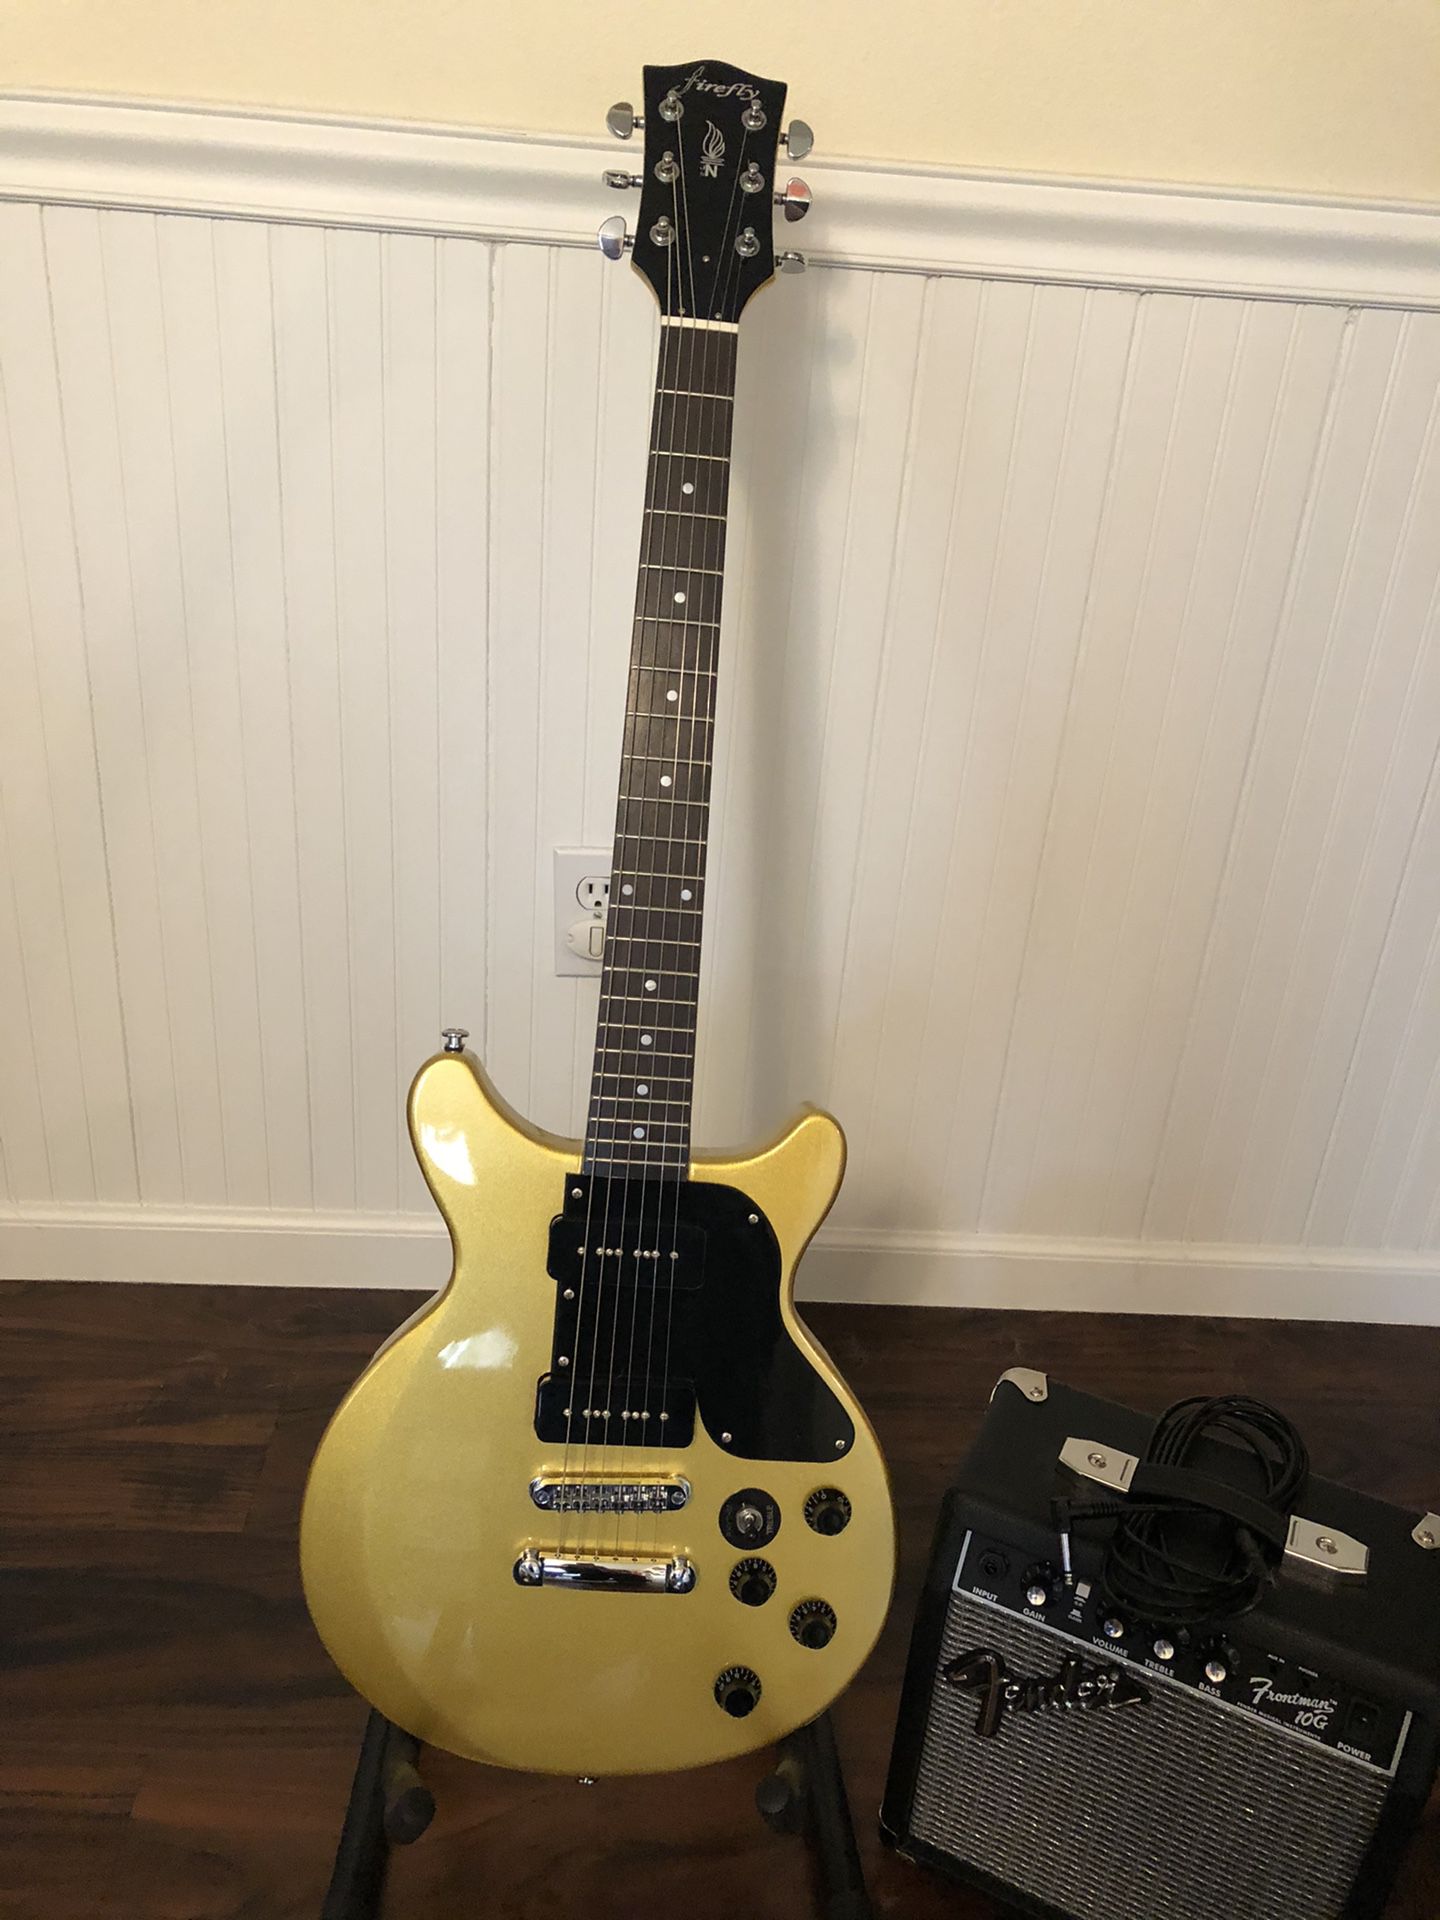 Firefly Electric Guitar